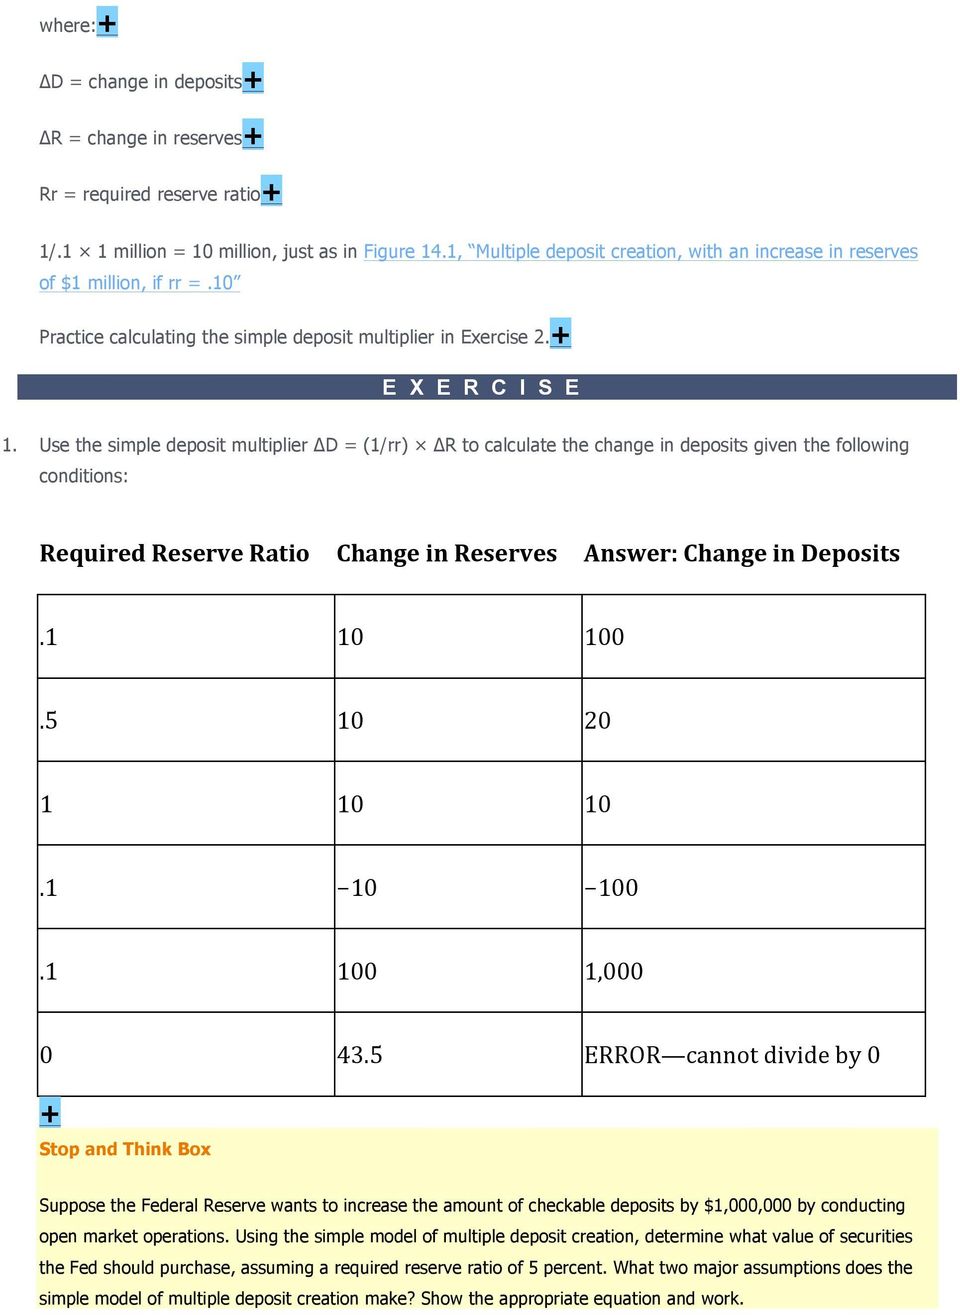 Use the simple deposit multiplier D = (1/rr) R to calculate the change in deposits given the following conditions: Required Reserve Ratio Change in Reserves Answer: Change in Deposits.1 10 100.